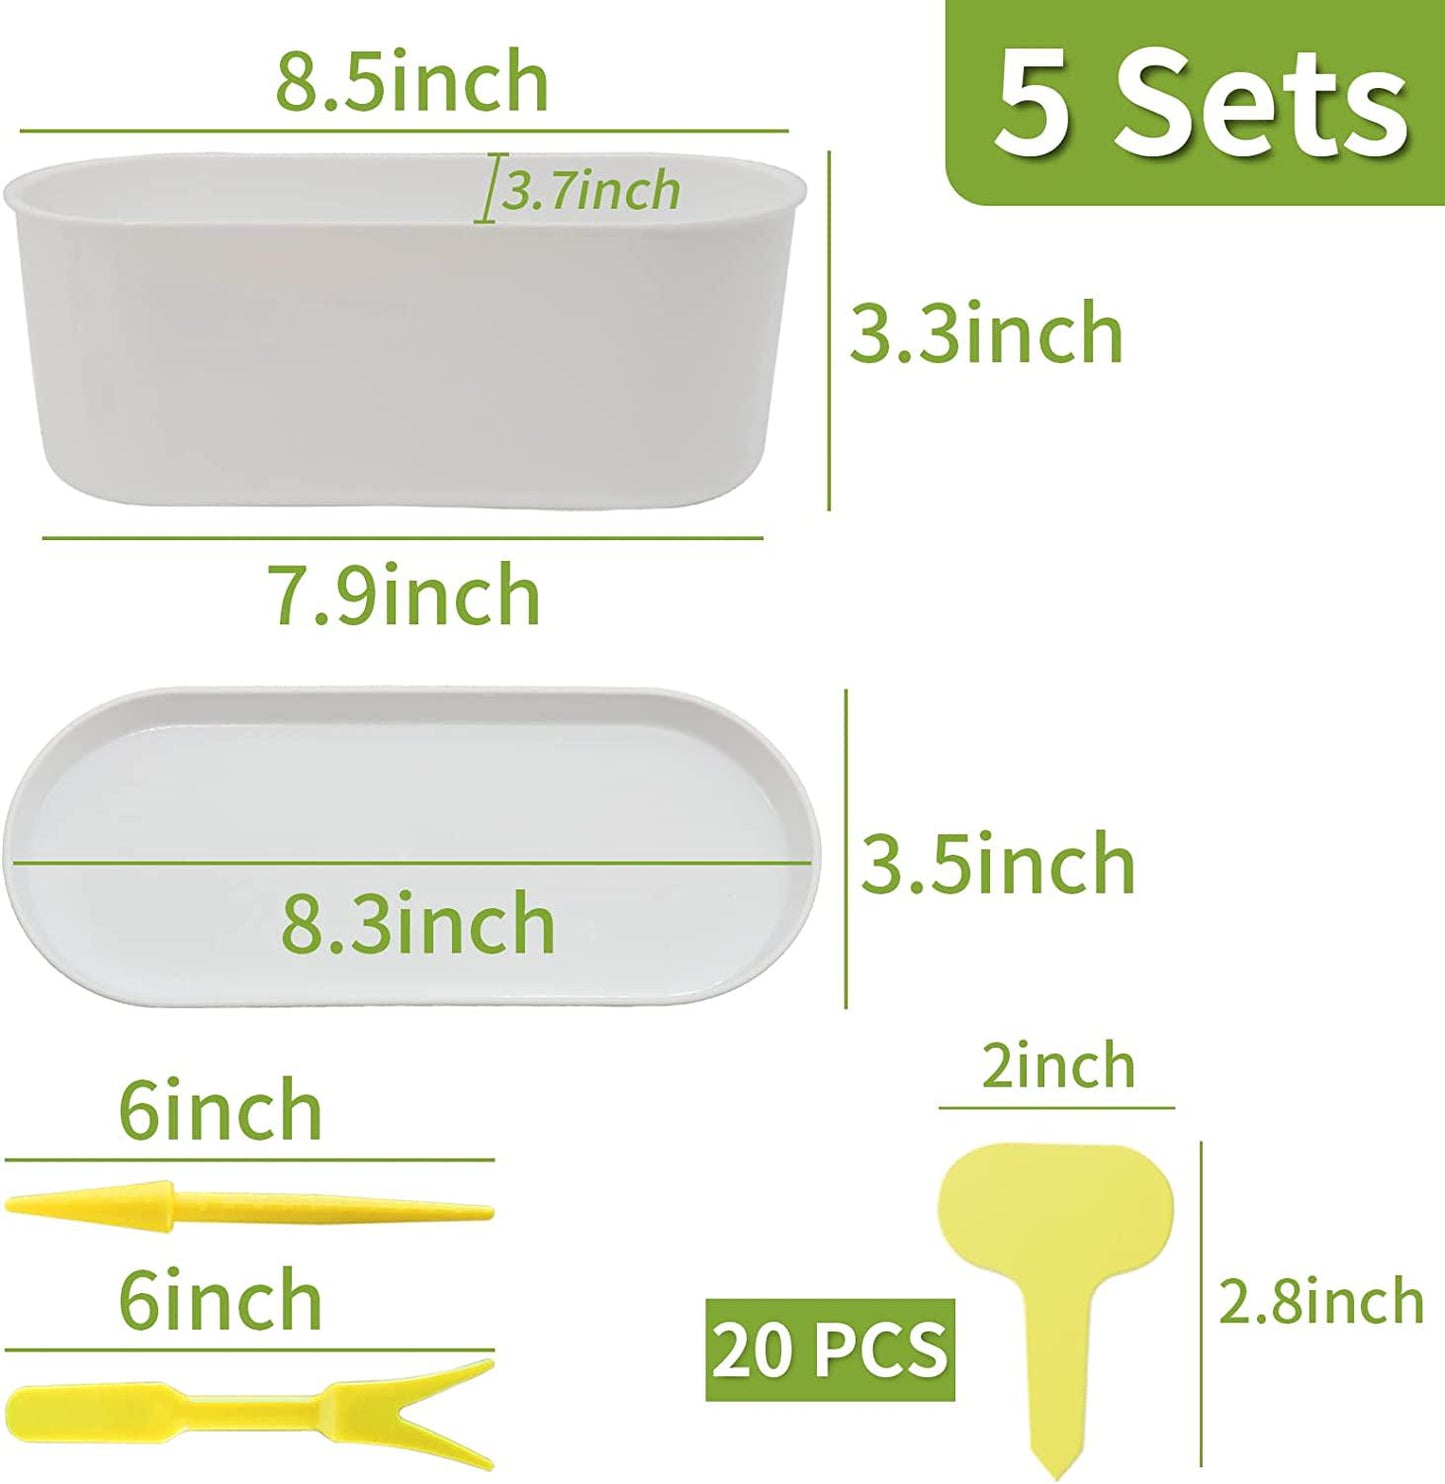 Torfican 5 Set Window Herb Planter Box Rectangular,8.5x3.5 Inch White Plastic Planters with Multiple Drainage Holes and Trays,Indoor Succulent Cactus Mint Flower Pot